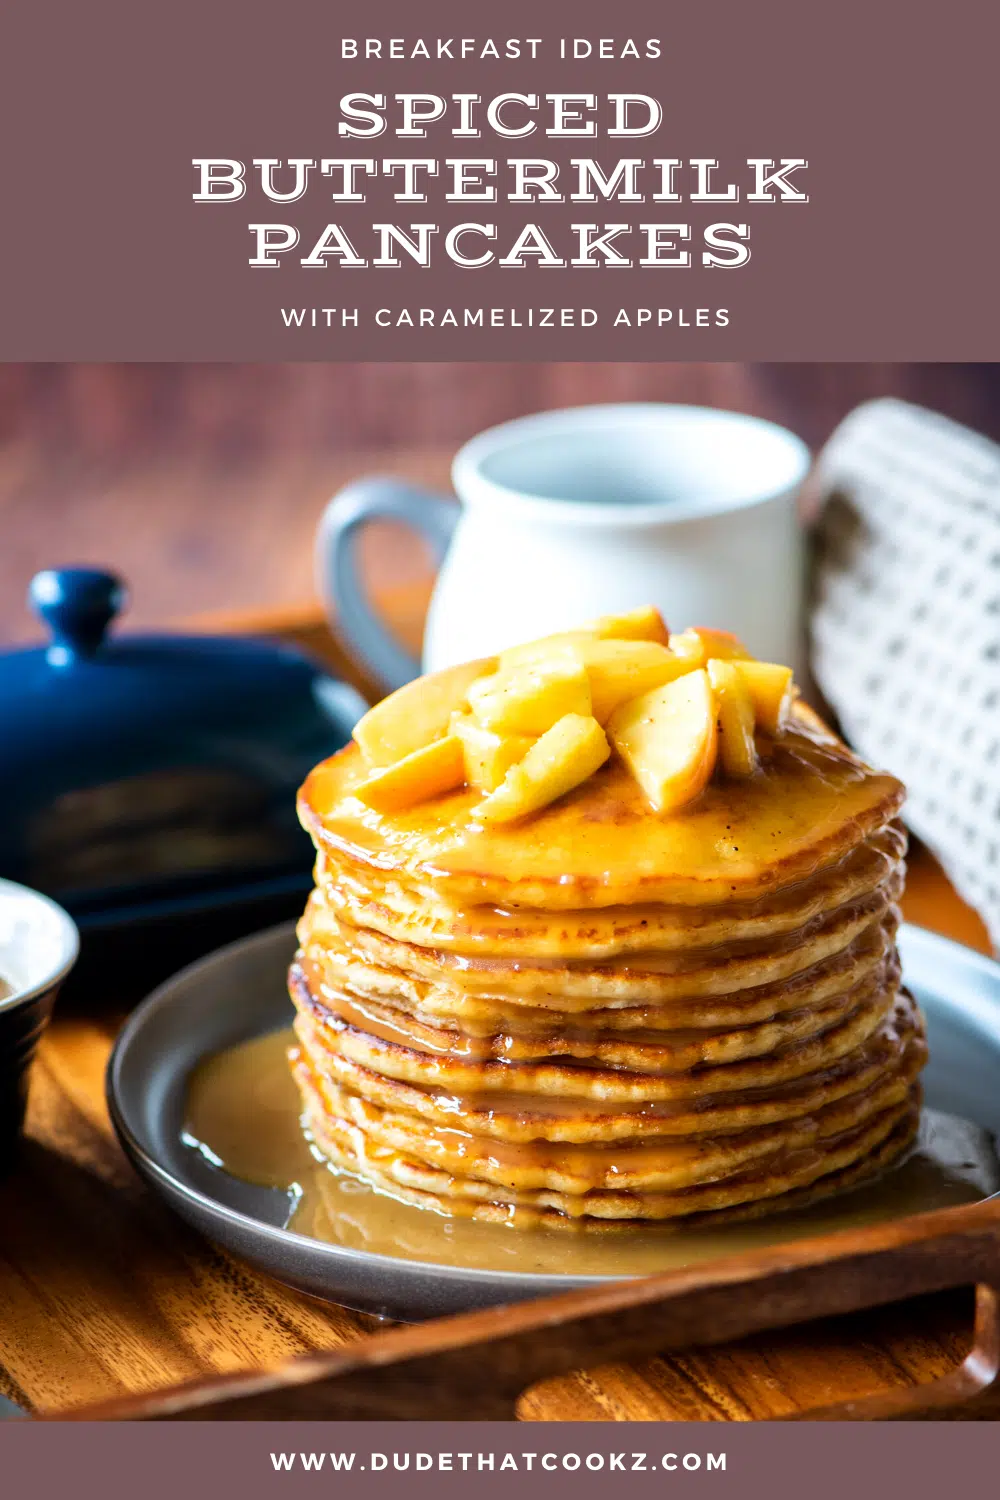 Spiced Buttermilk Pancakes with Caramelized Apples